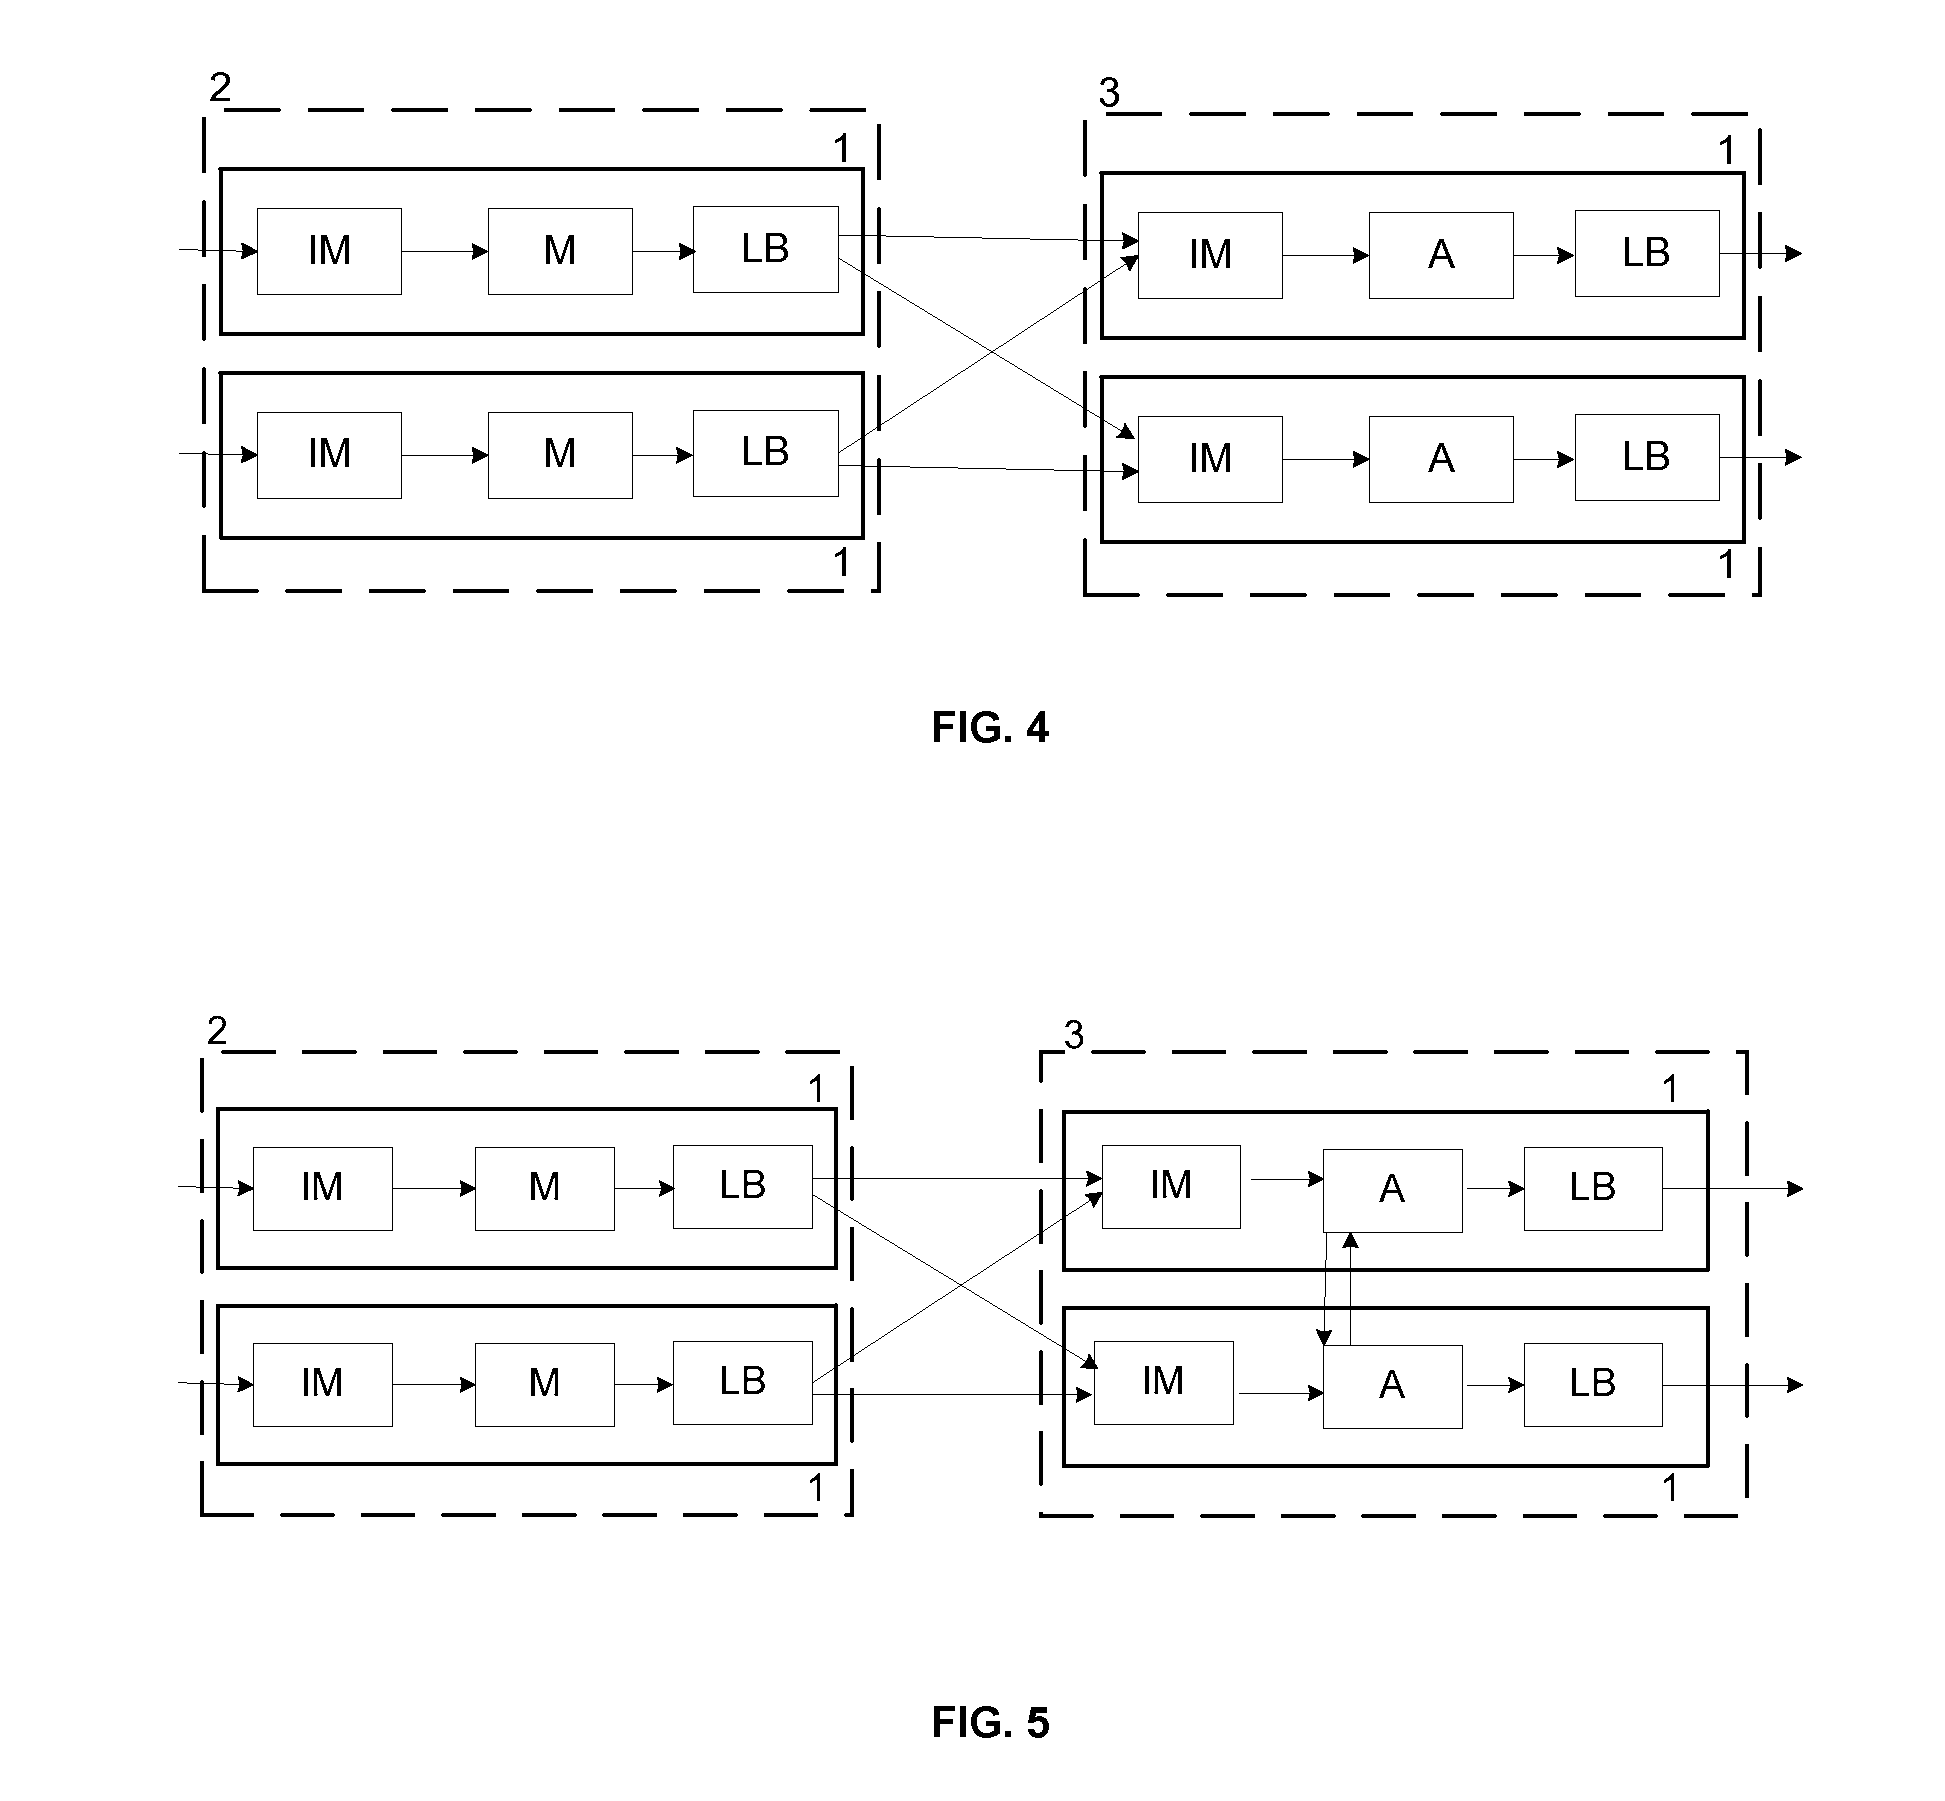 Parallel processing of continuous queries on data streams